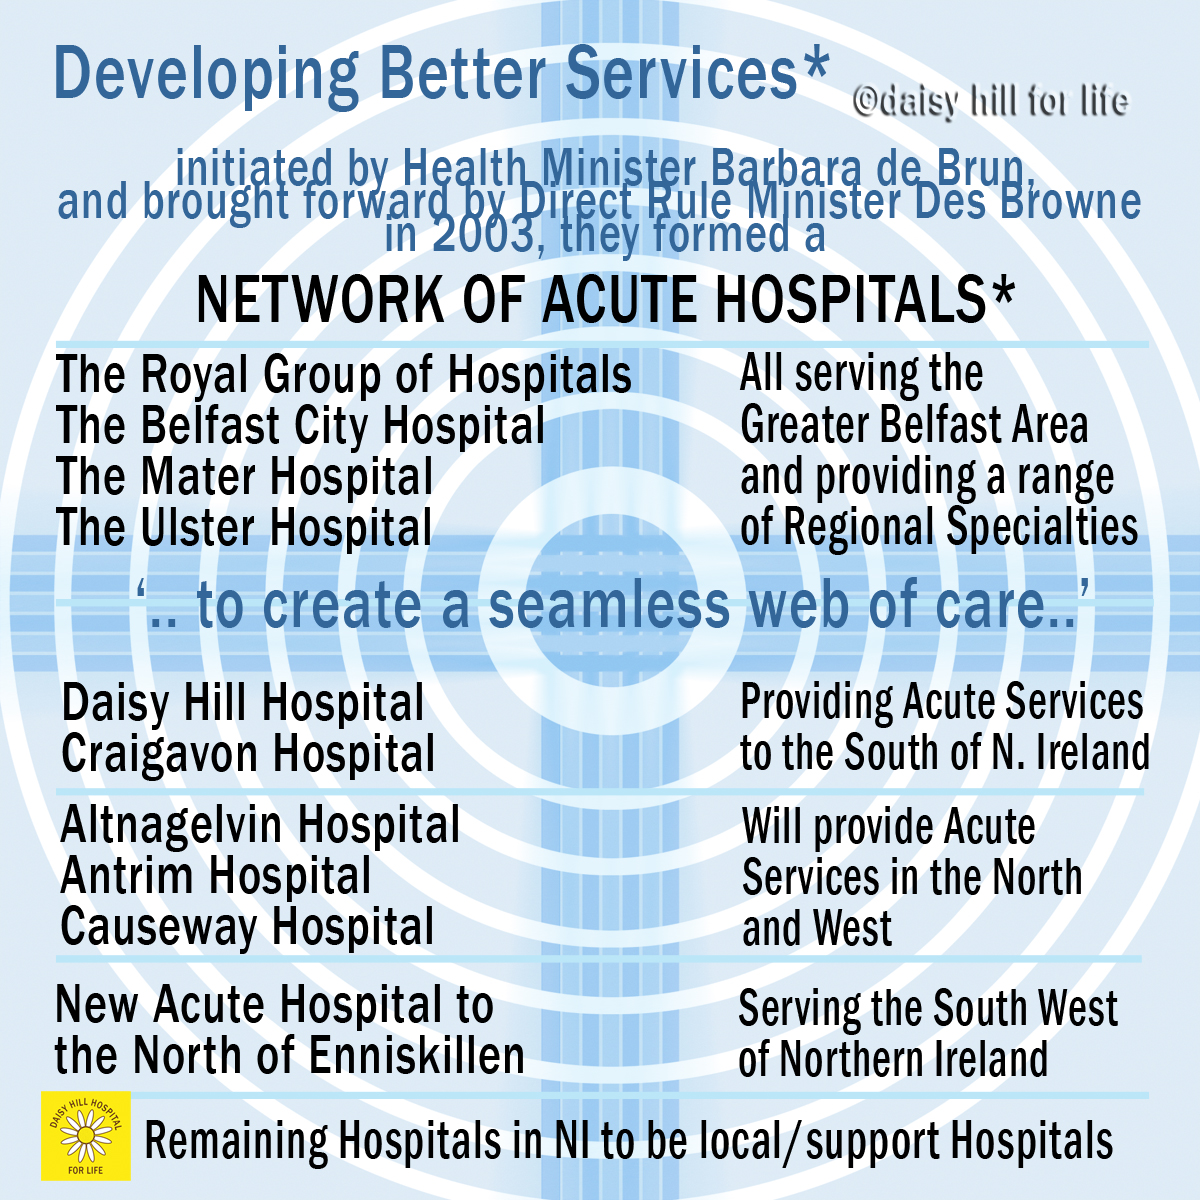 Daisy Hill Hospital is an acute hospital to provide a Seamless web of care within the NI hospital network